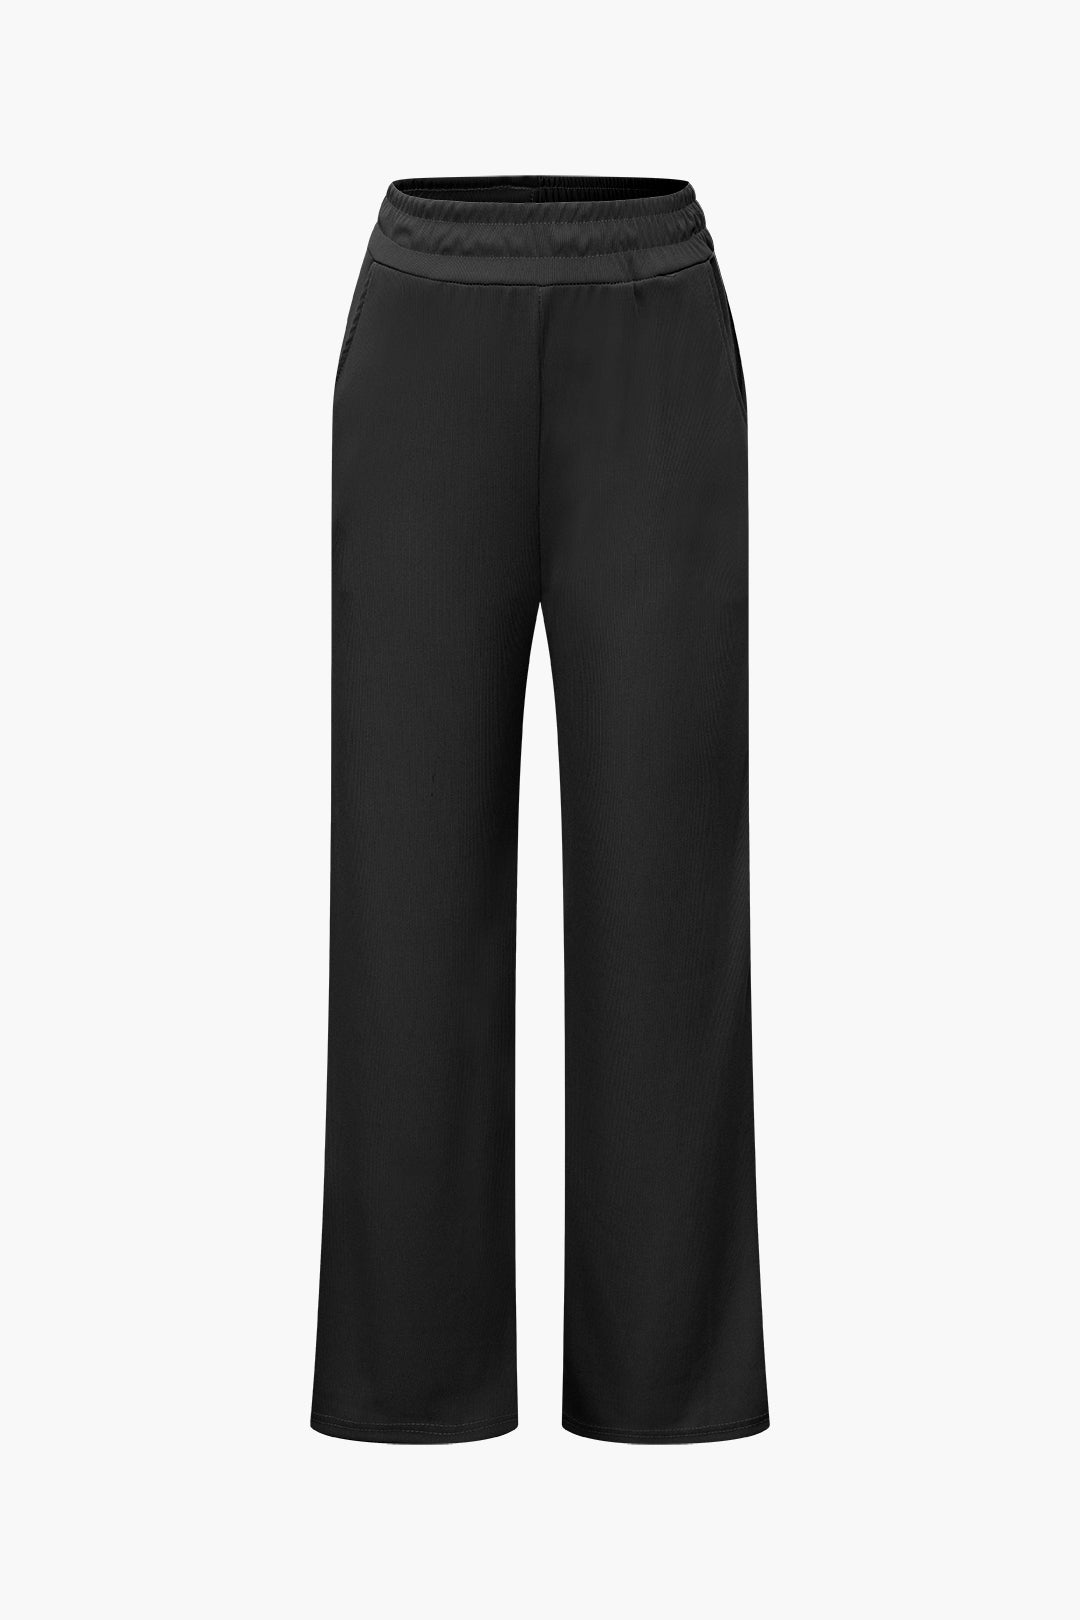 Ruched Pant Set/Matching pant and top set, Women's casual wear